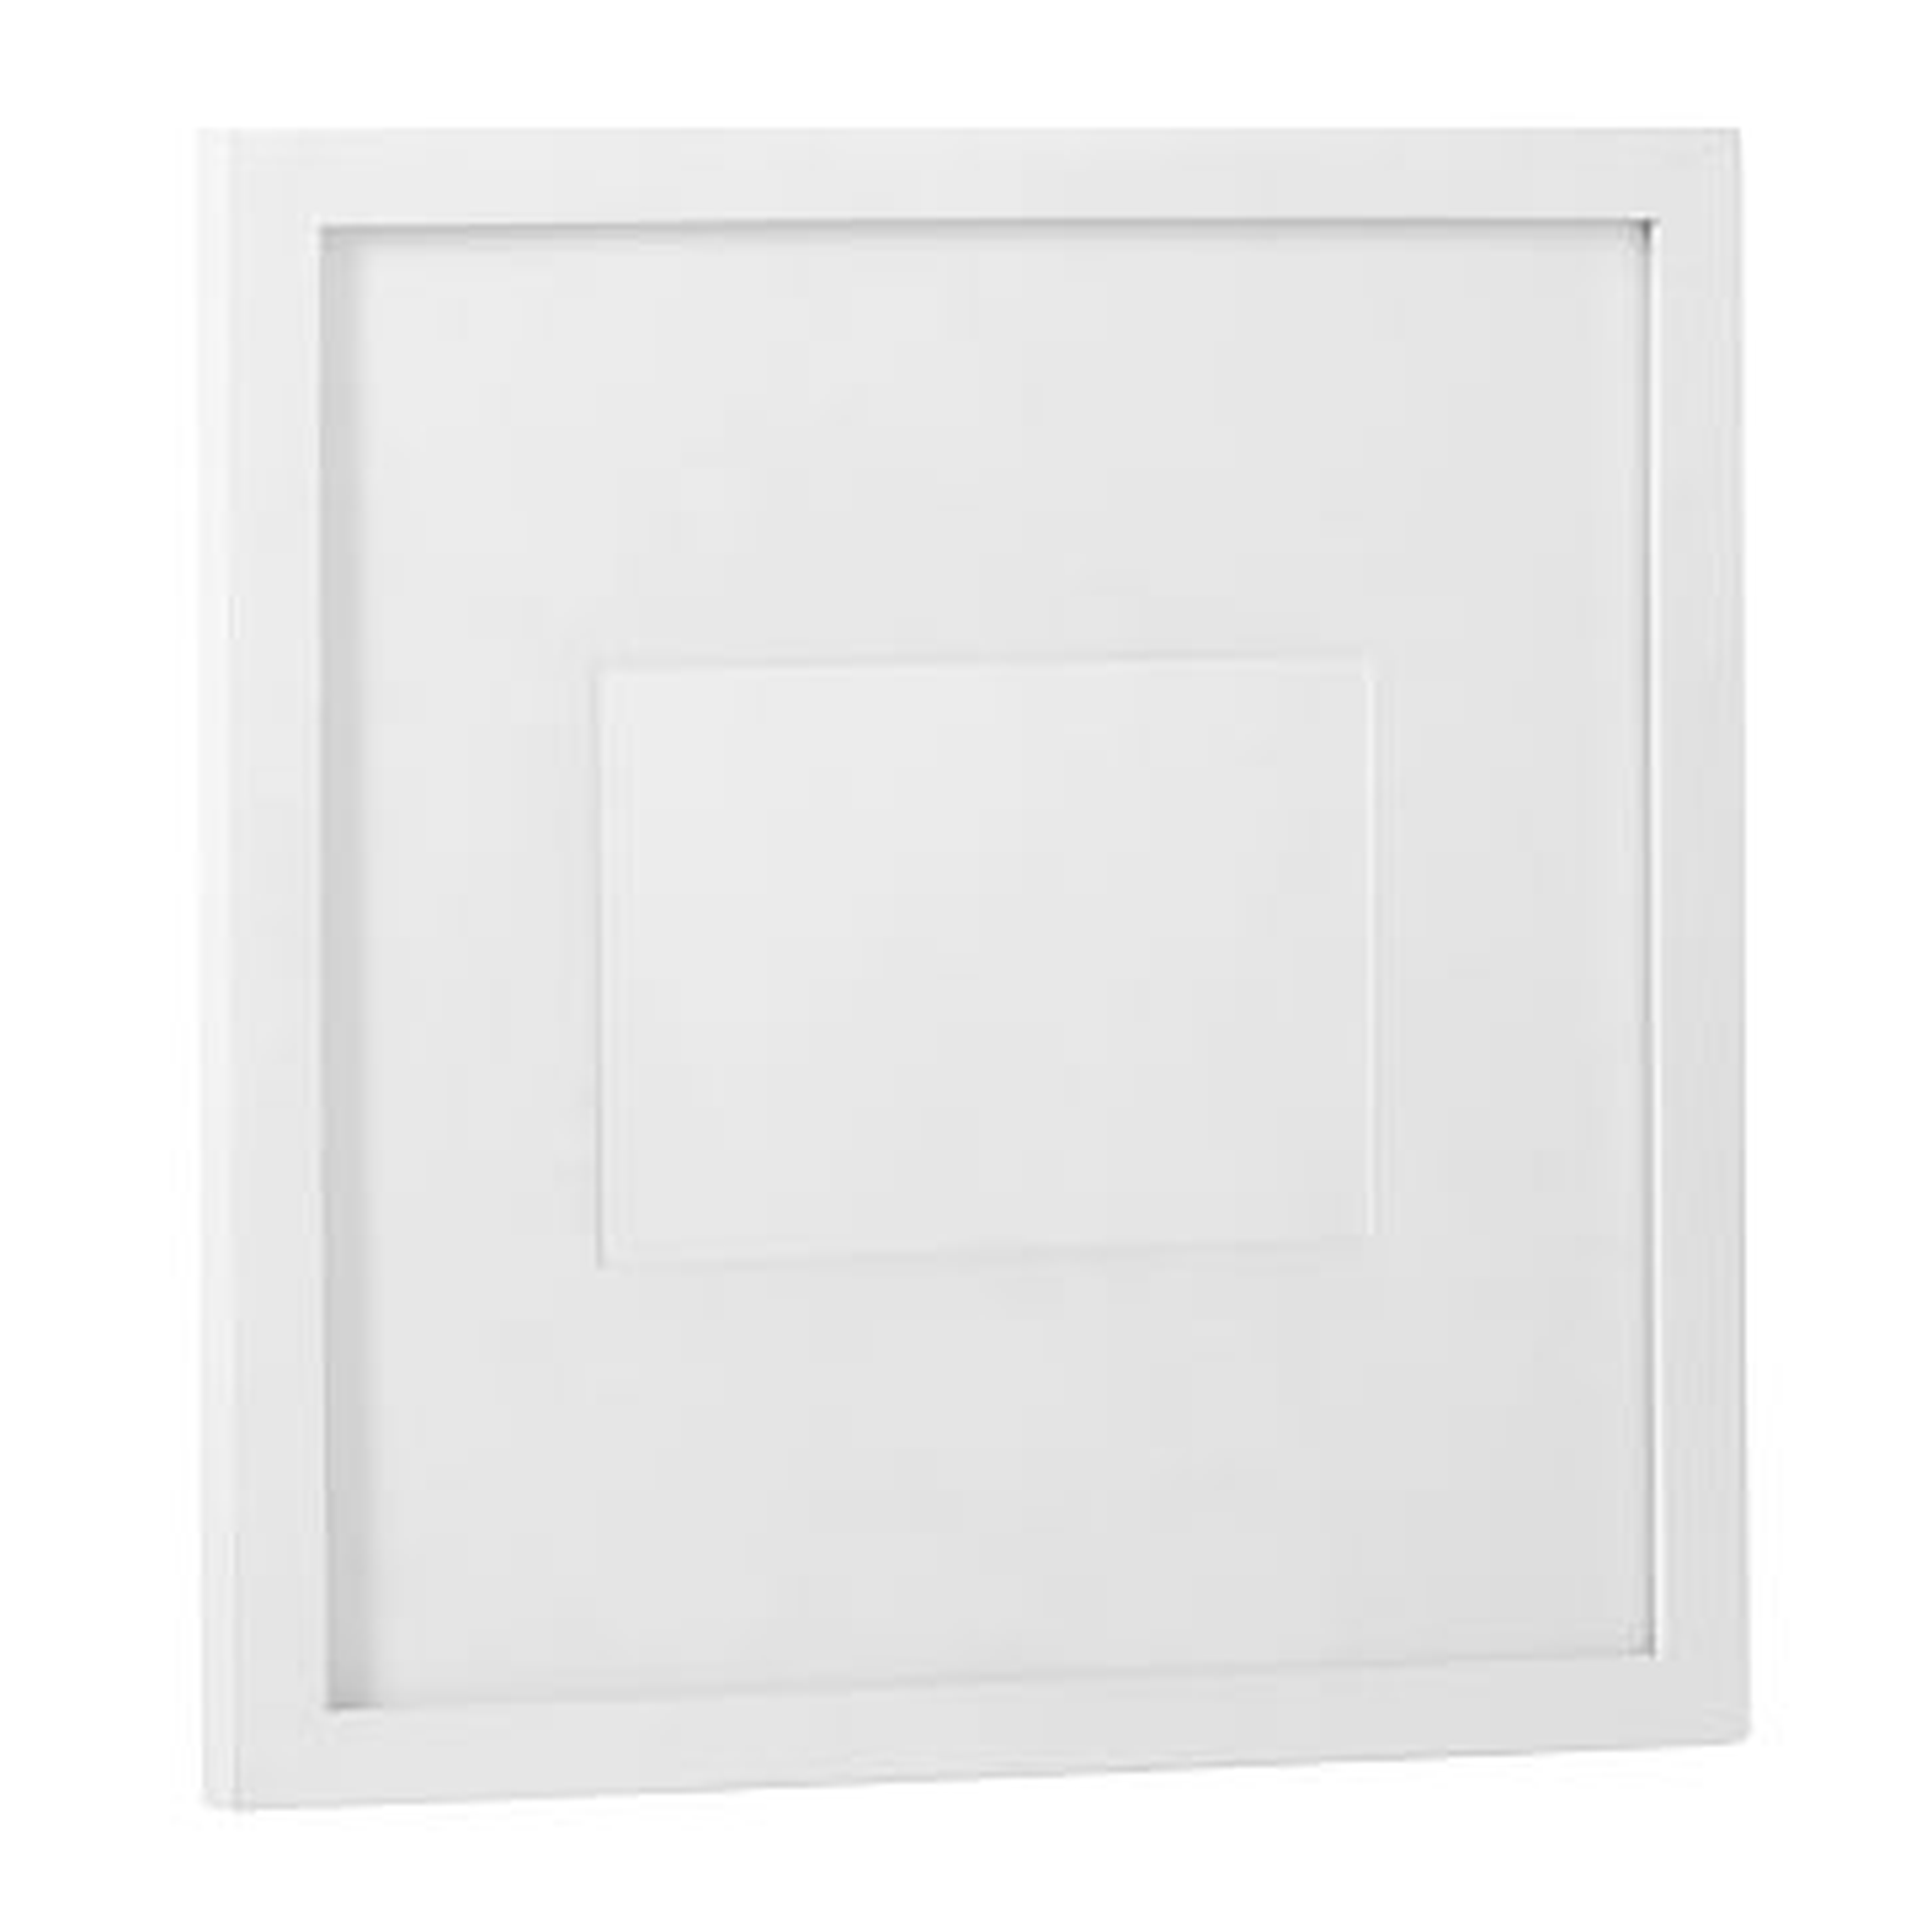 Gallery Frame, 5"x 7" (12" x 12" without mat), White Lacquer - West Elm